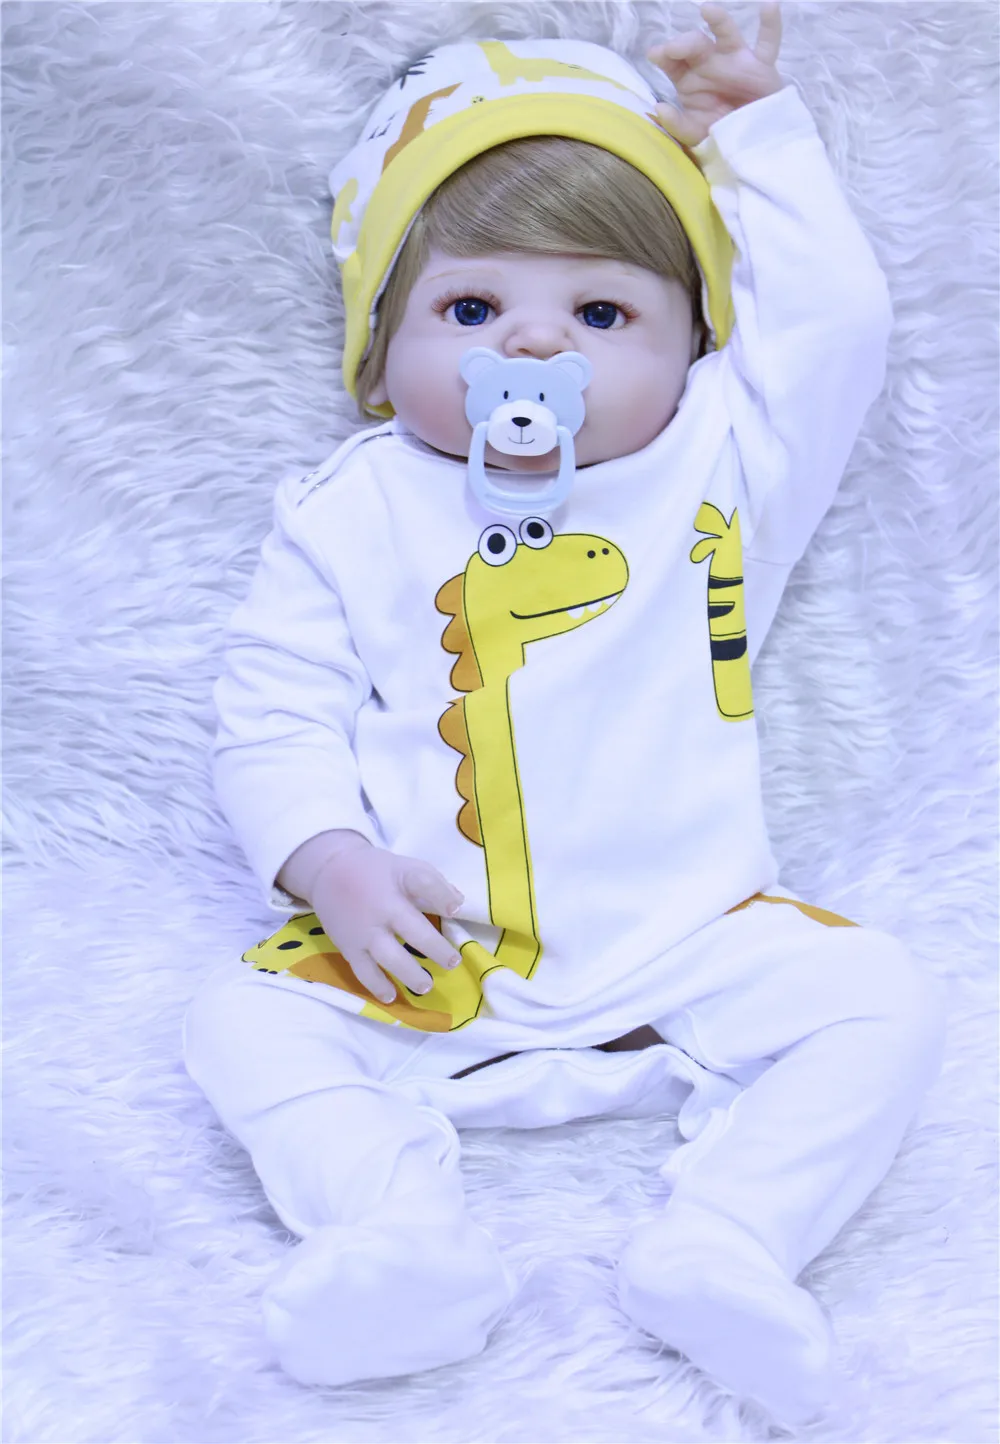 

57cm Full Silicone Reborn Dolls Kids Playmate 23Inch Realistic boy Baby Dolls For Sale Bebe Alive Reborn Toy Xmas Gifts For girl